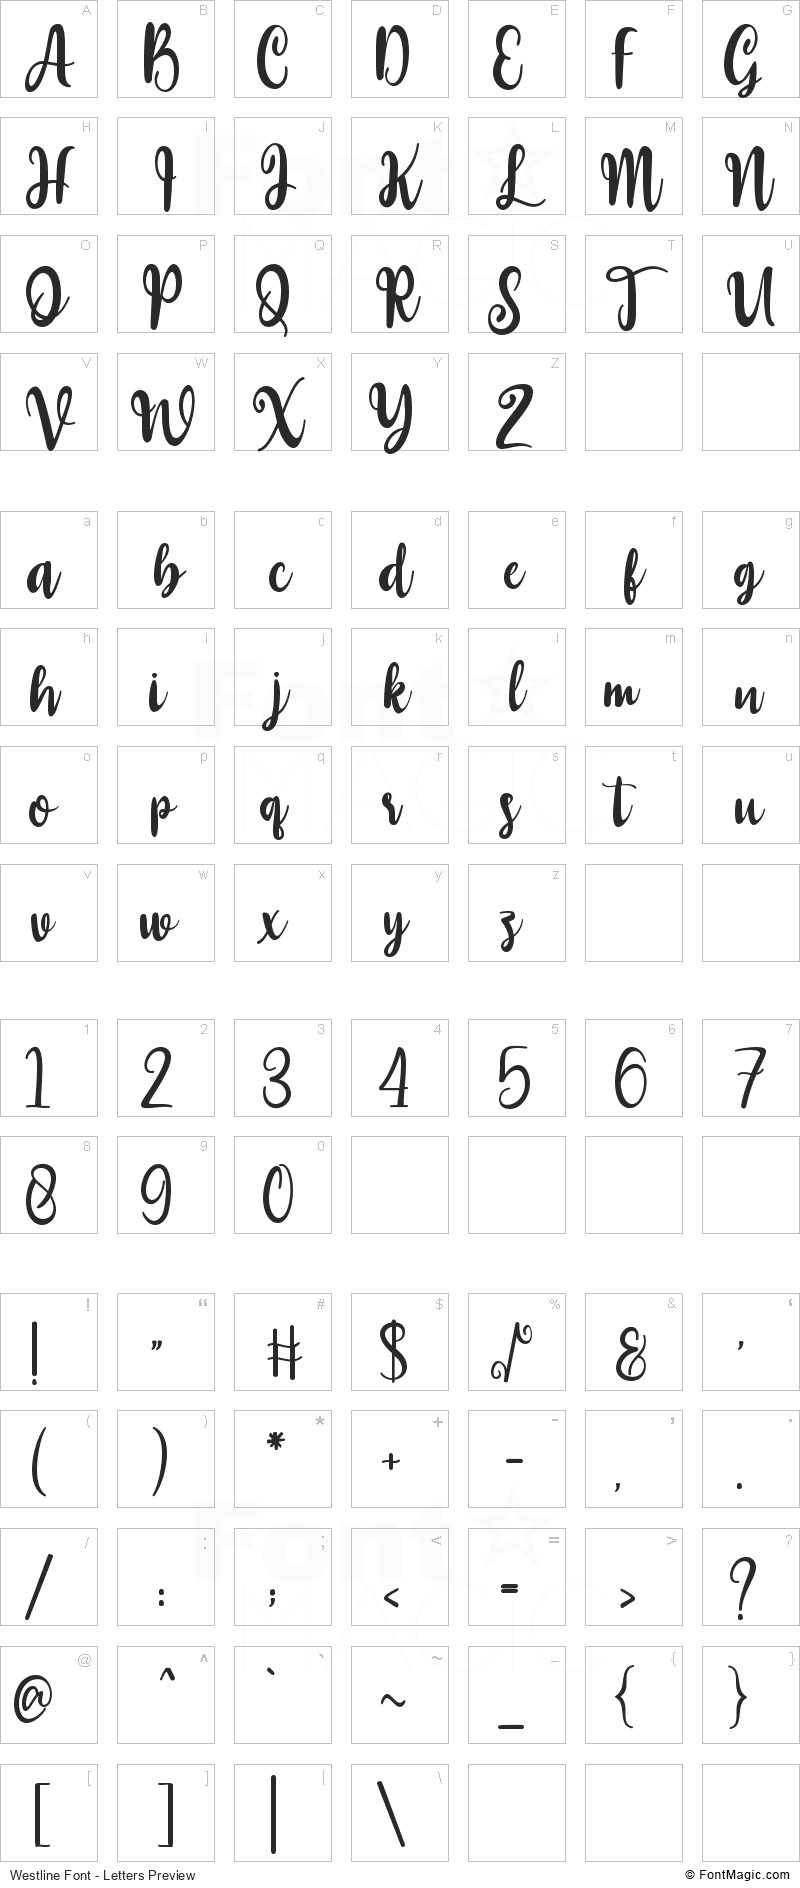 Westline Font - All Latters Preview Chart